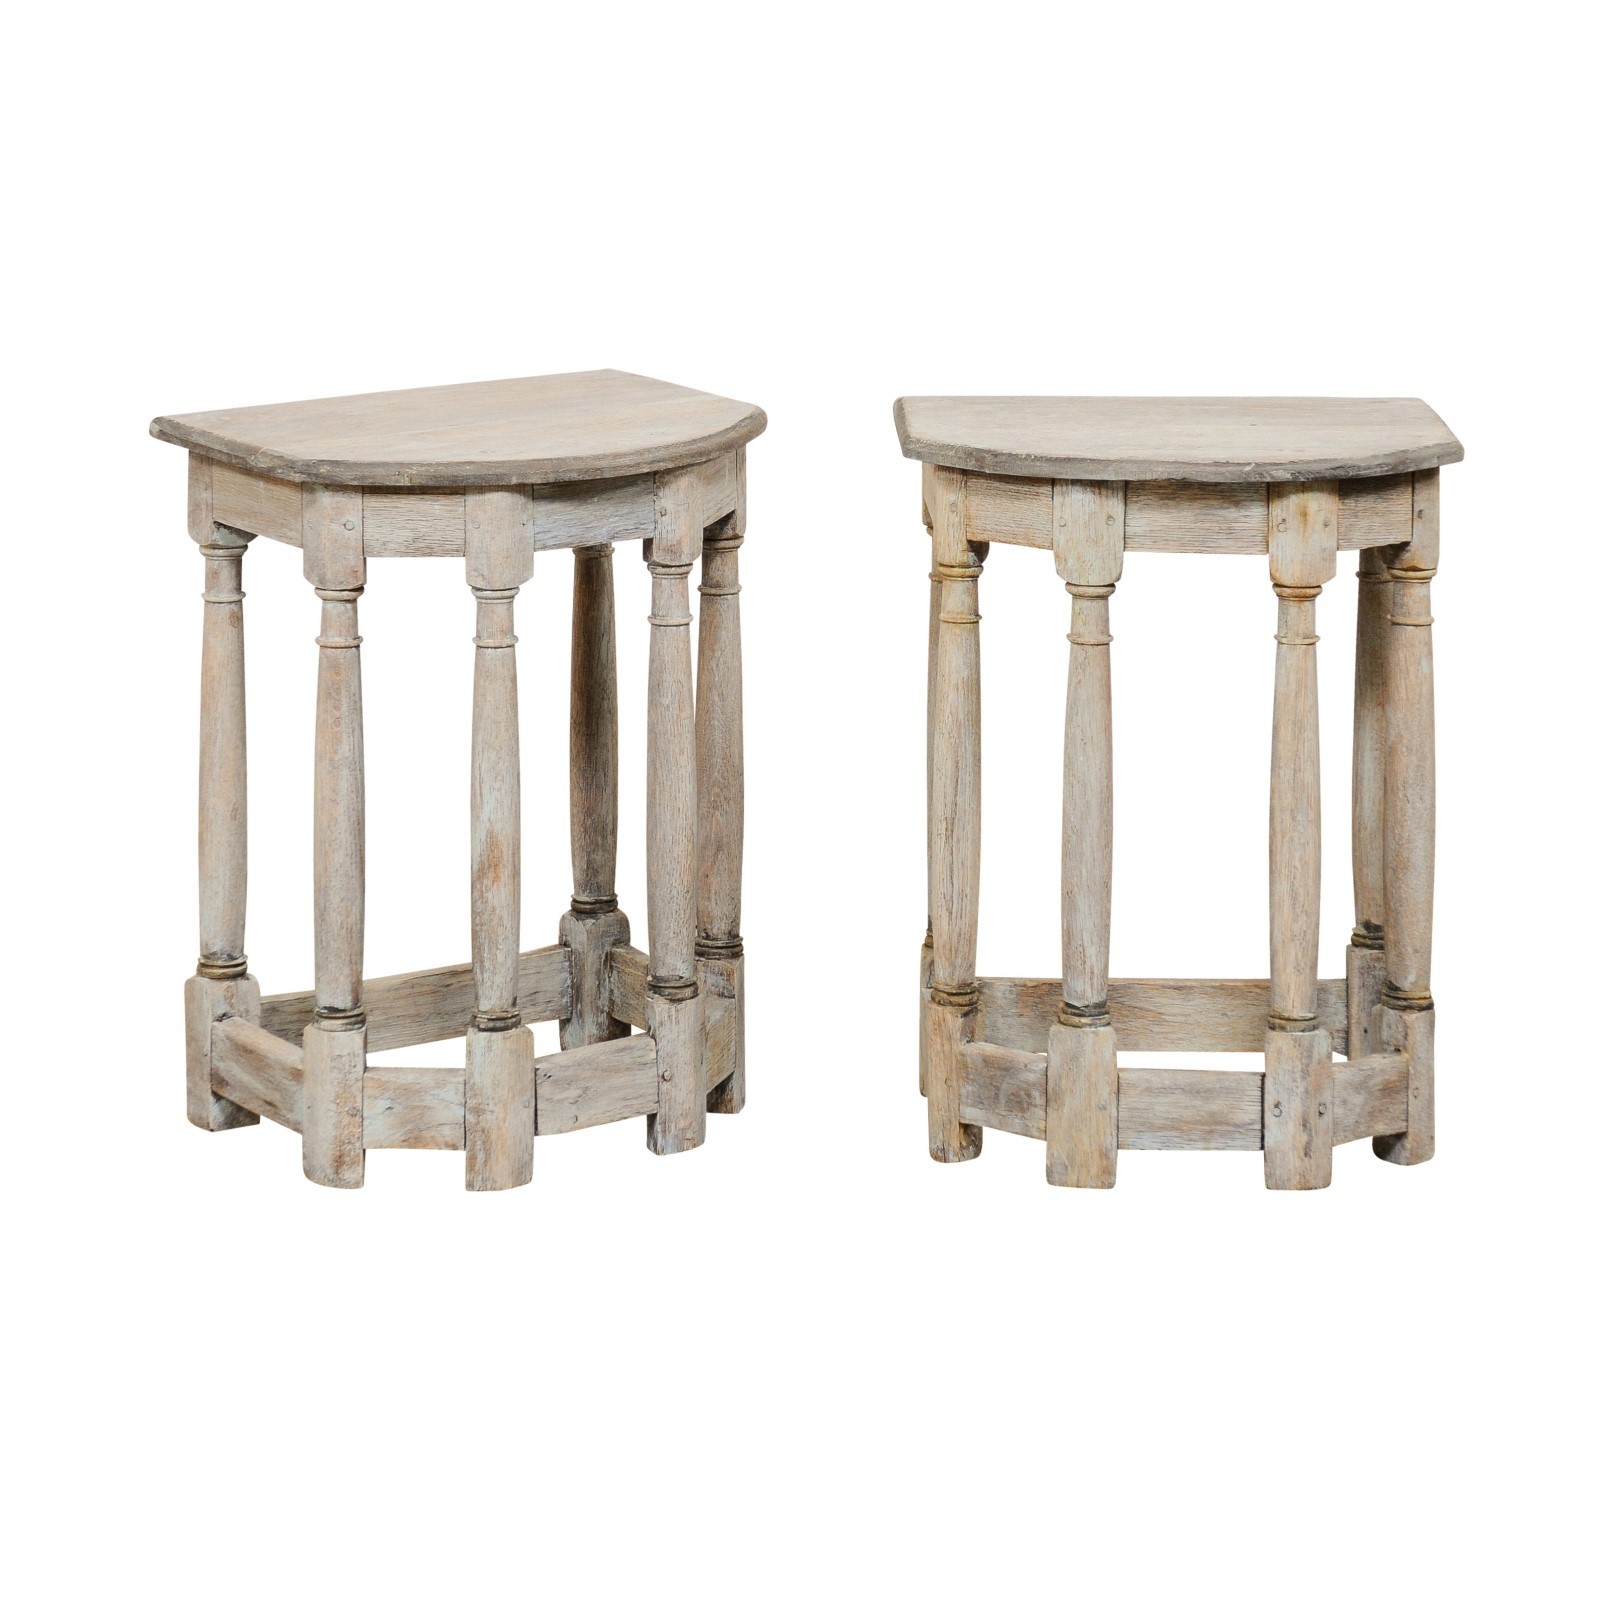 19th C. Bow-Front & Pilaster Leg End Tables